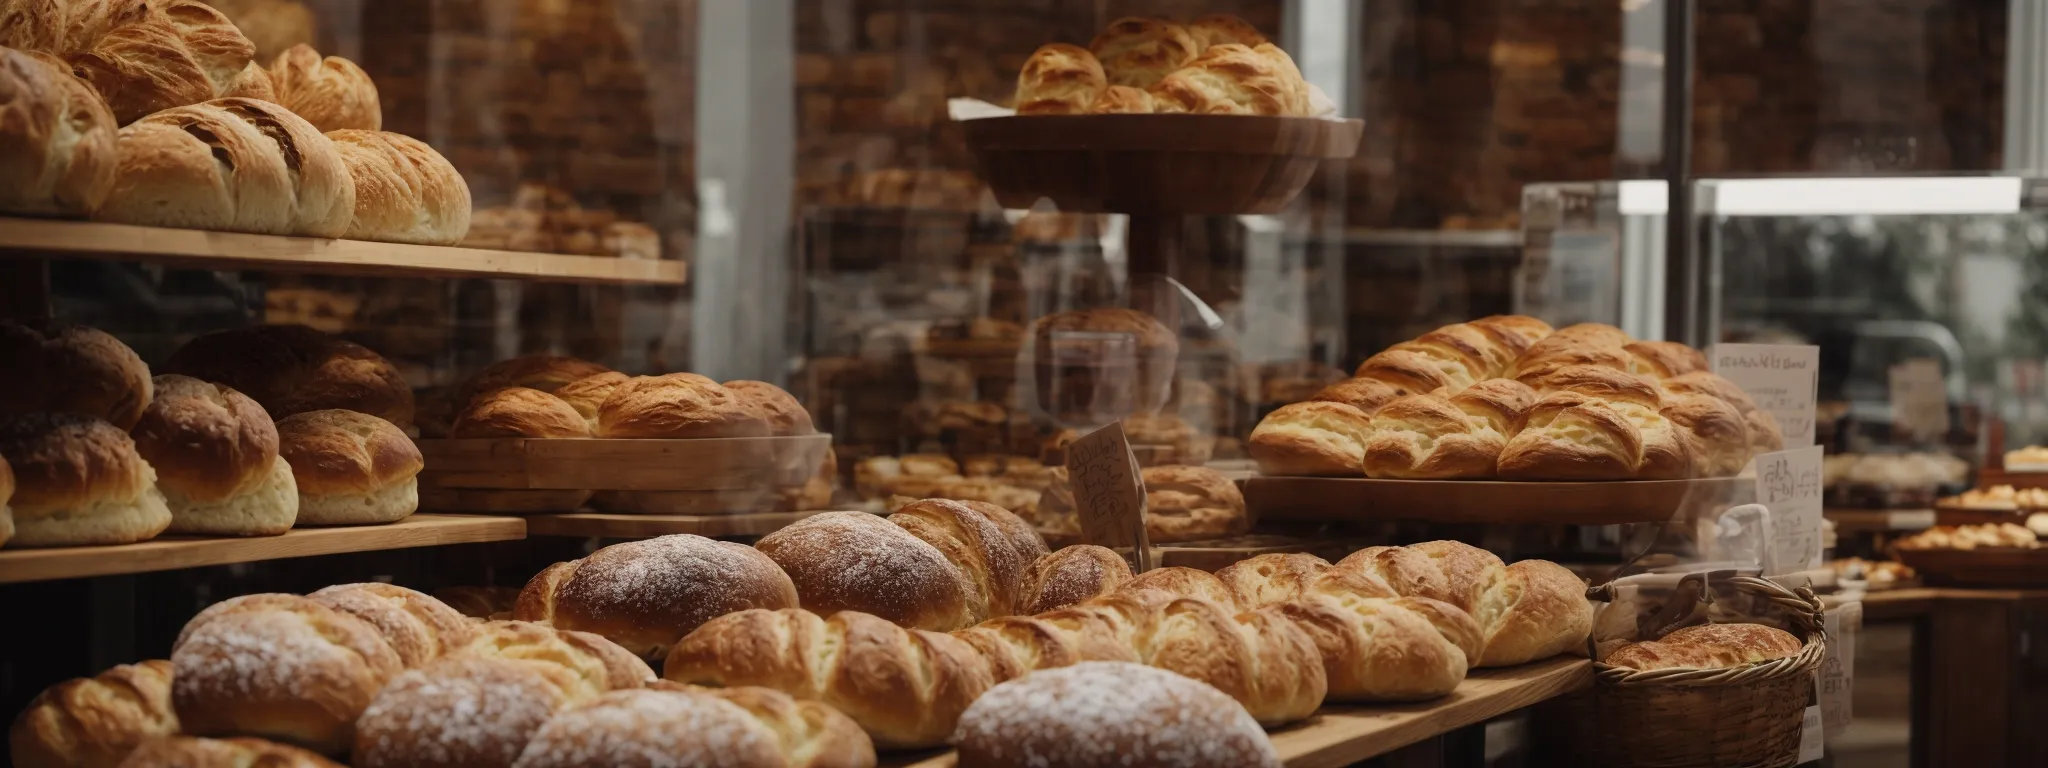 a picturesque bakery display filled with an assortment of artisan bread and pastries, inviting online exploration.